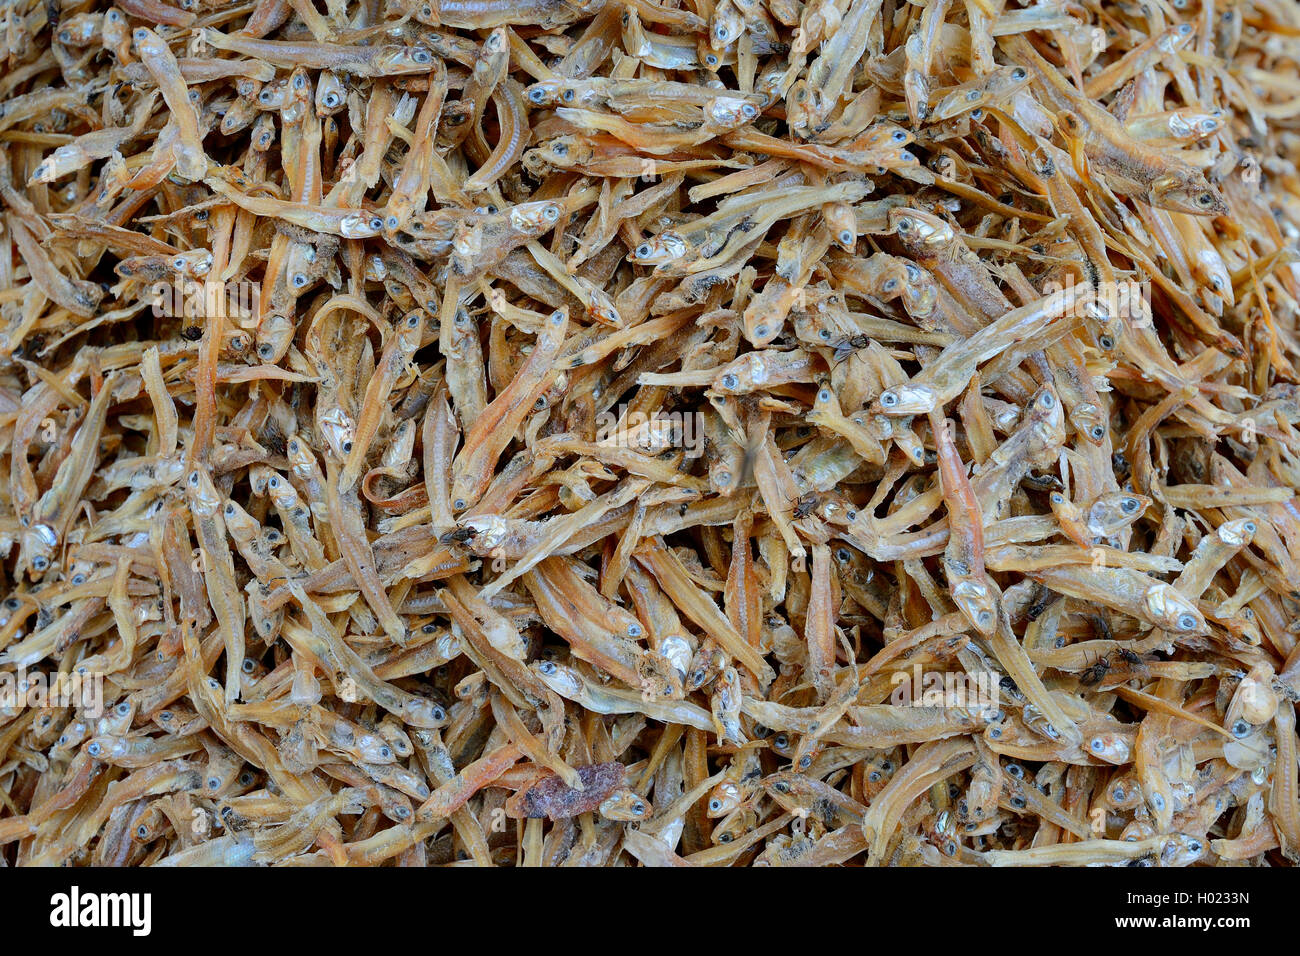 dried fishes at a market in Seririt, Indonesia, Bali Stock Photo